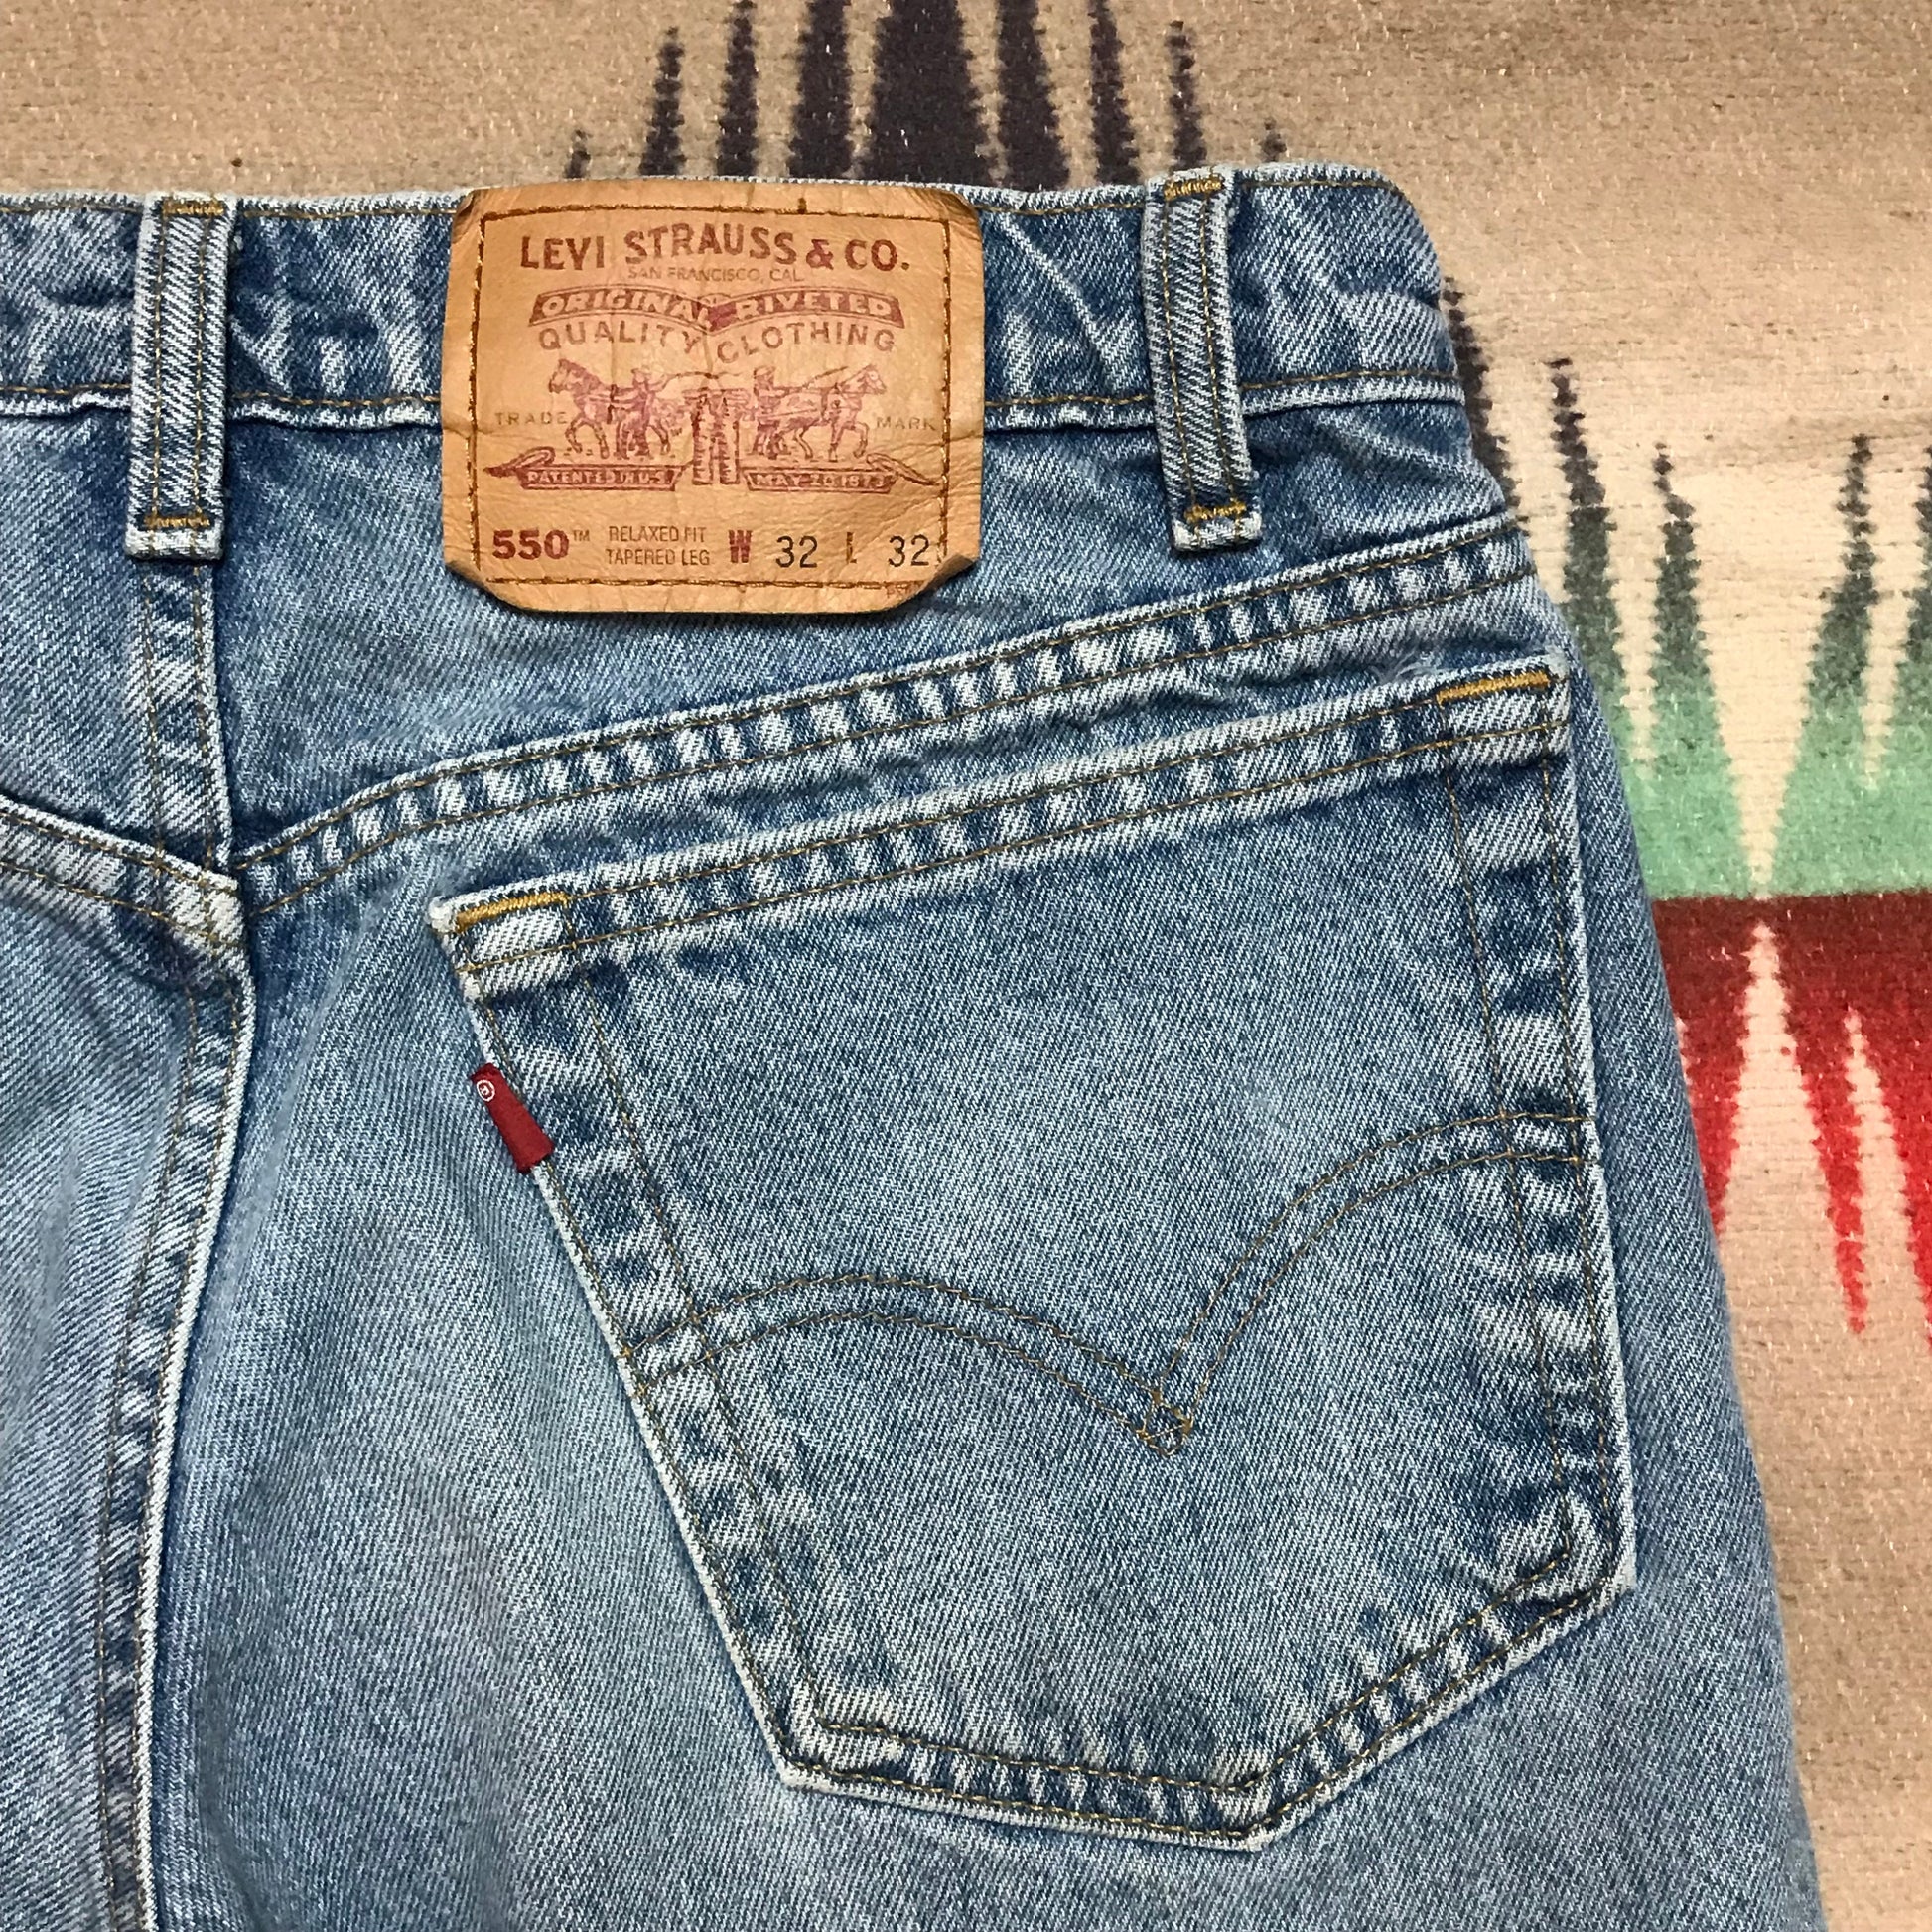 1990s Levi's 550 Jeans Made in Canada Size 30x31 – People's Champ Vintage